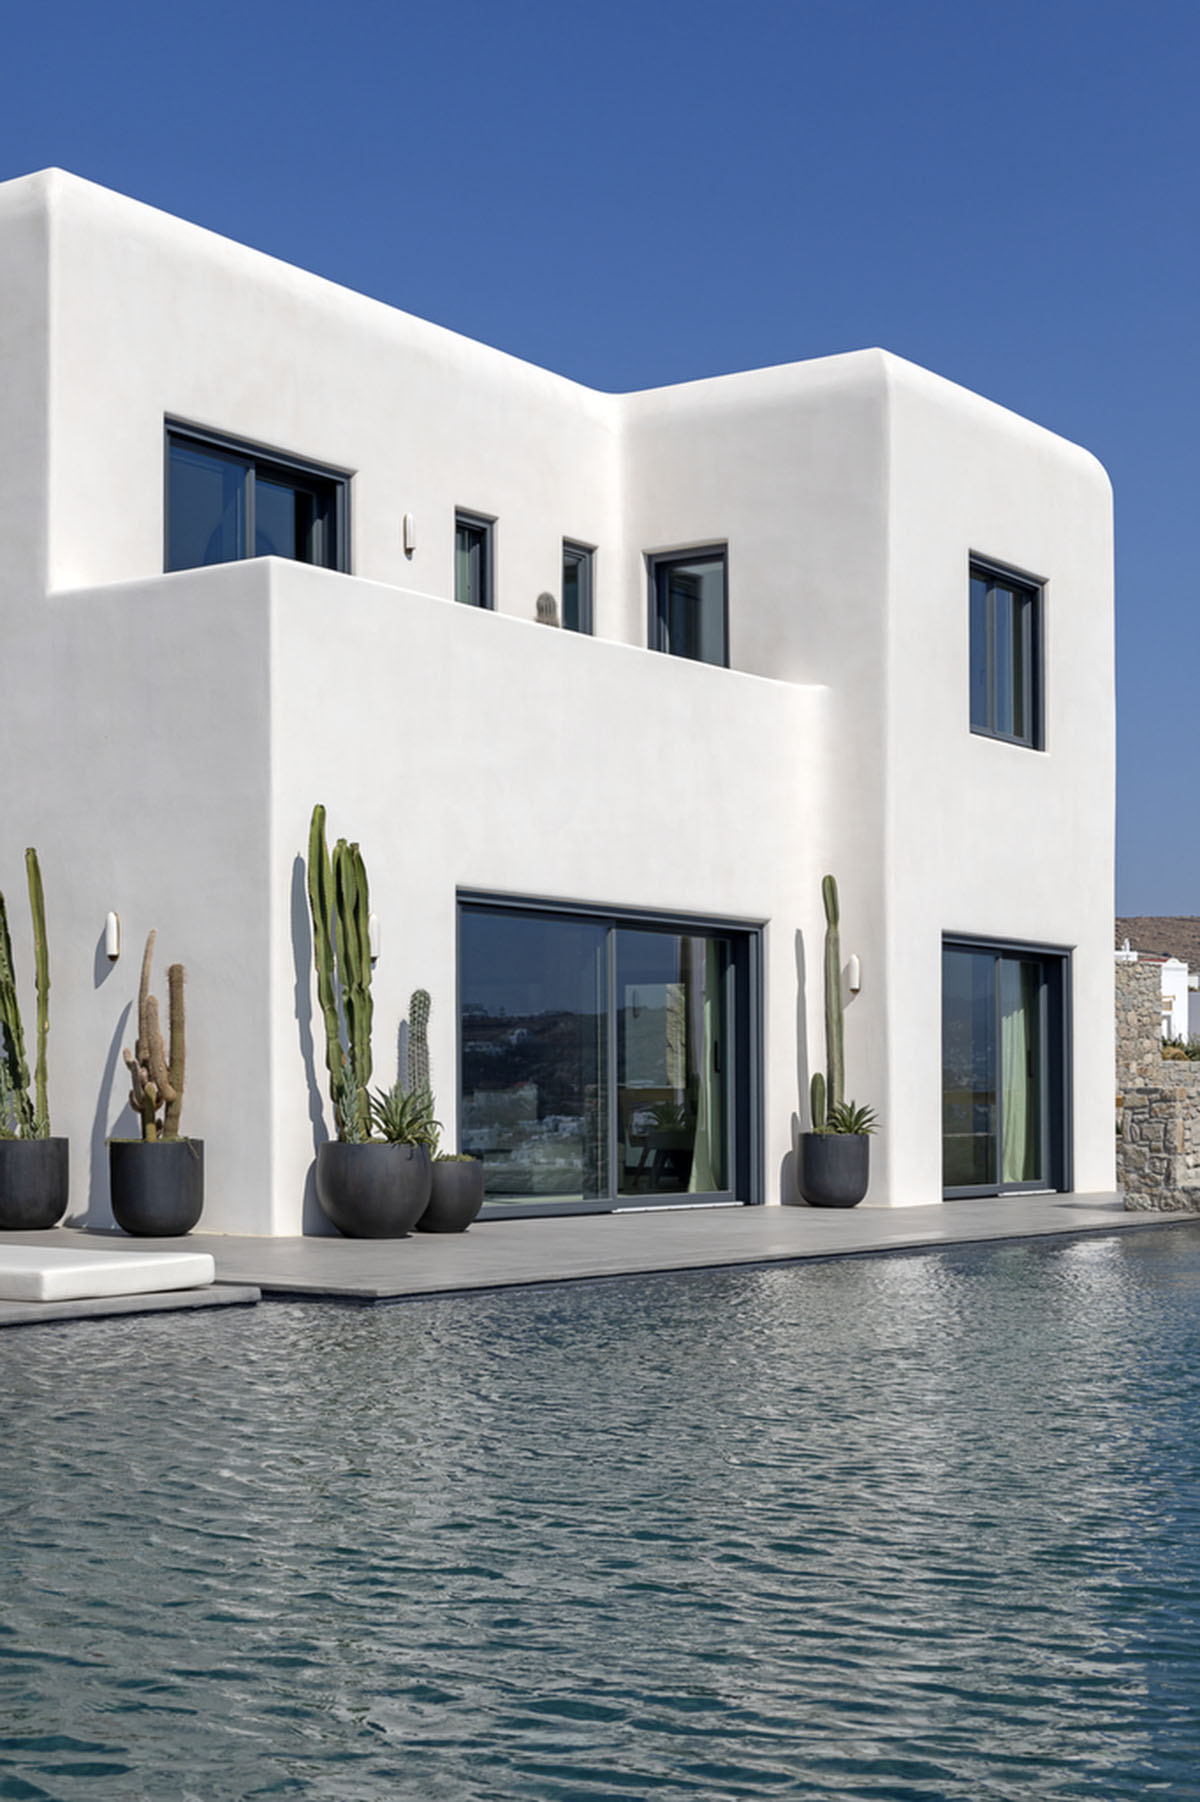 MK Design Studio designs luxurious holiday villa with creamy white walls  and stone-walled terraces